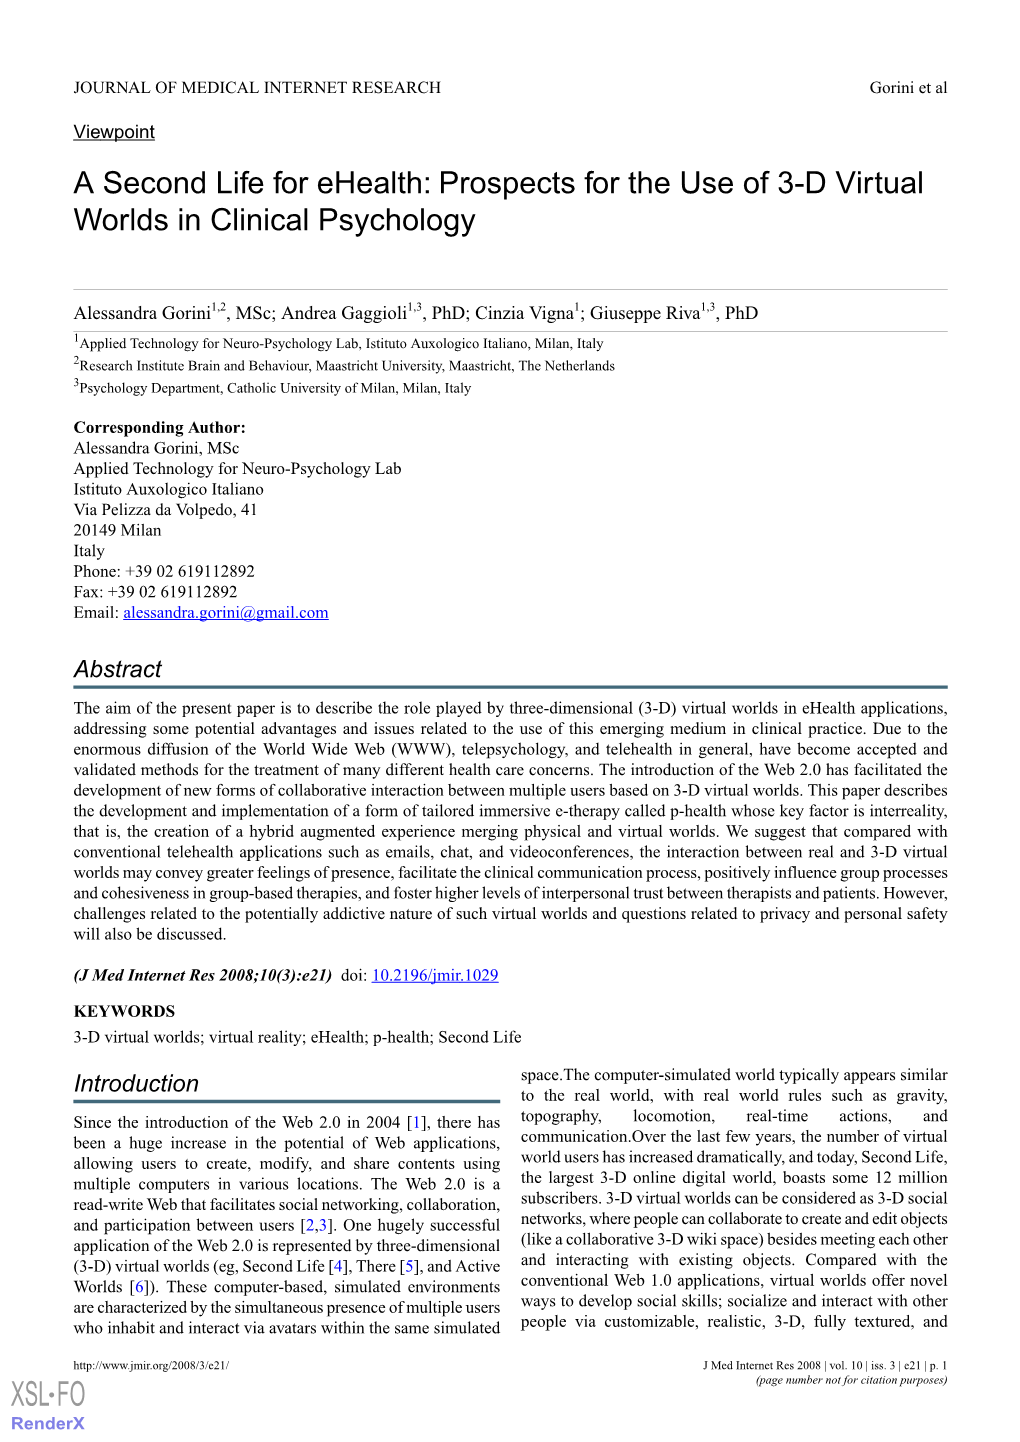 Prospects for the Use of 3-D Virtual Worlds in Clinical Psychology